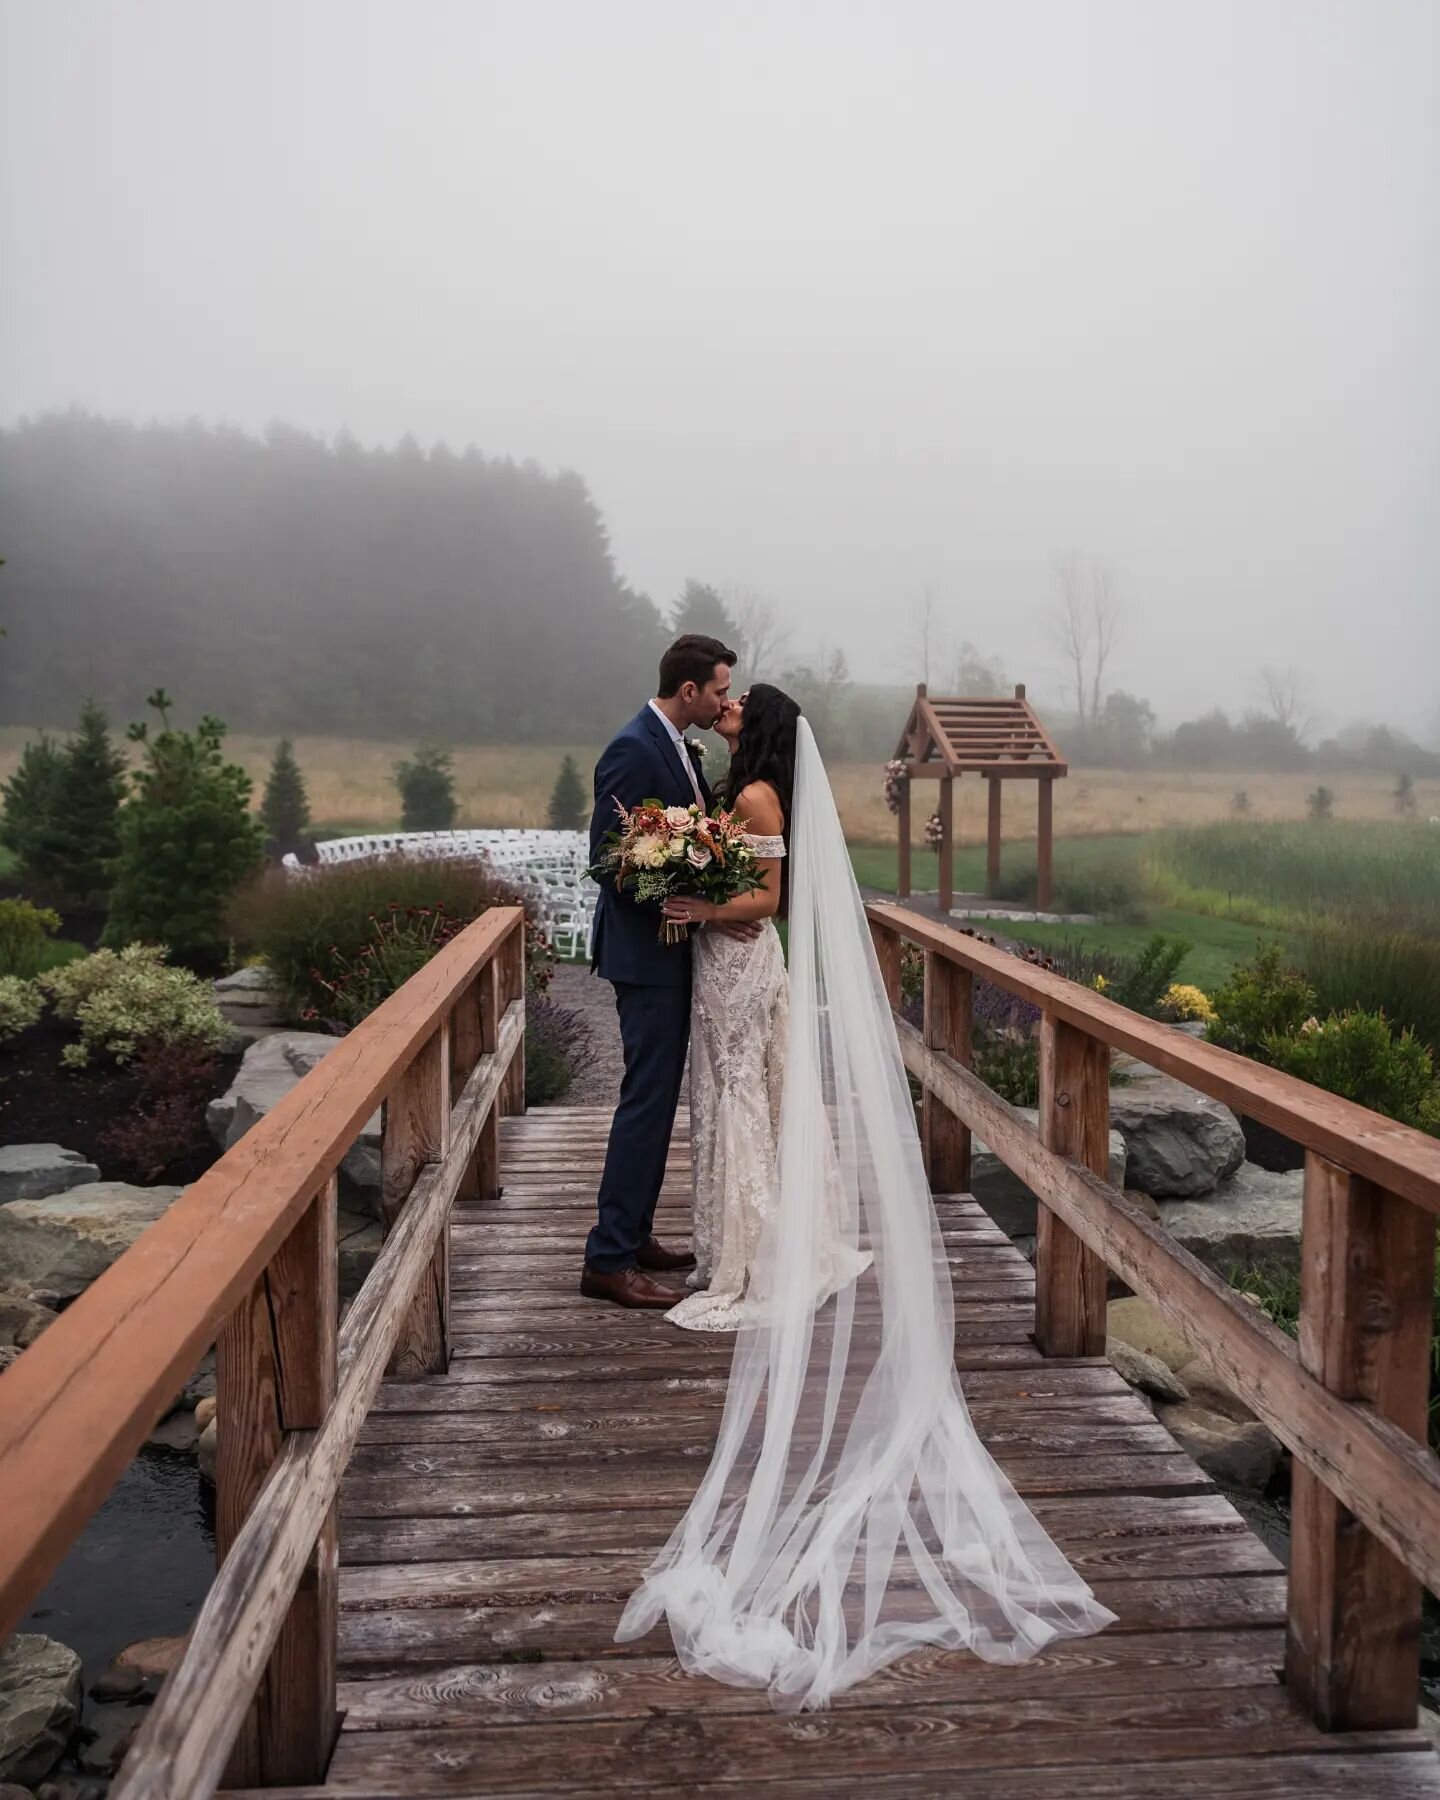 &mdash; we never saw the sun on their wedding day, but dang did these two look incredible!!! The most perfect moody, foggy day filled with so much love🤍